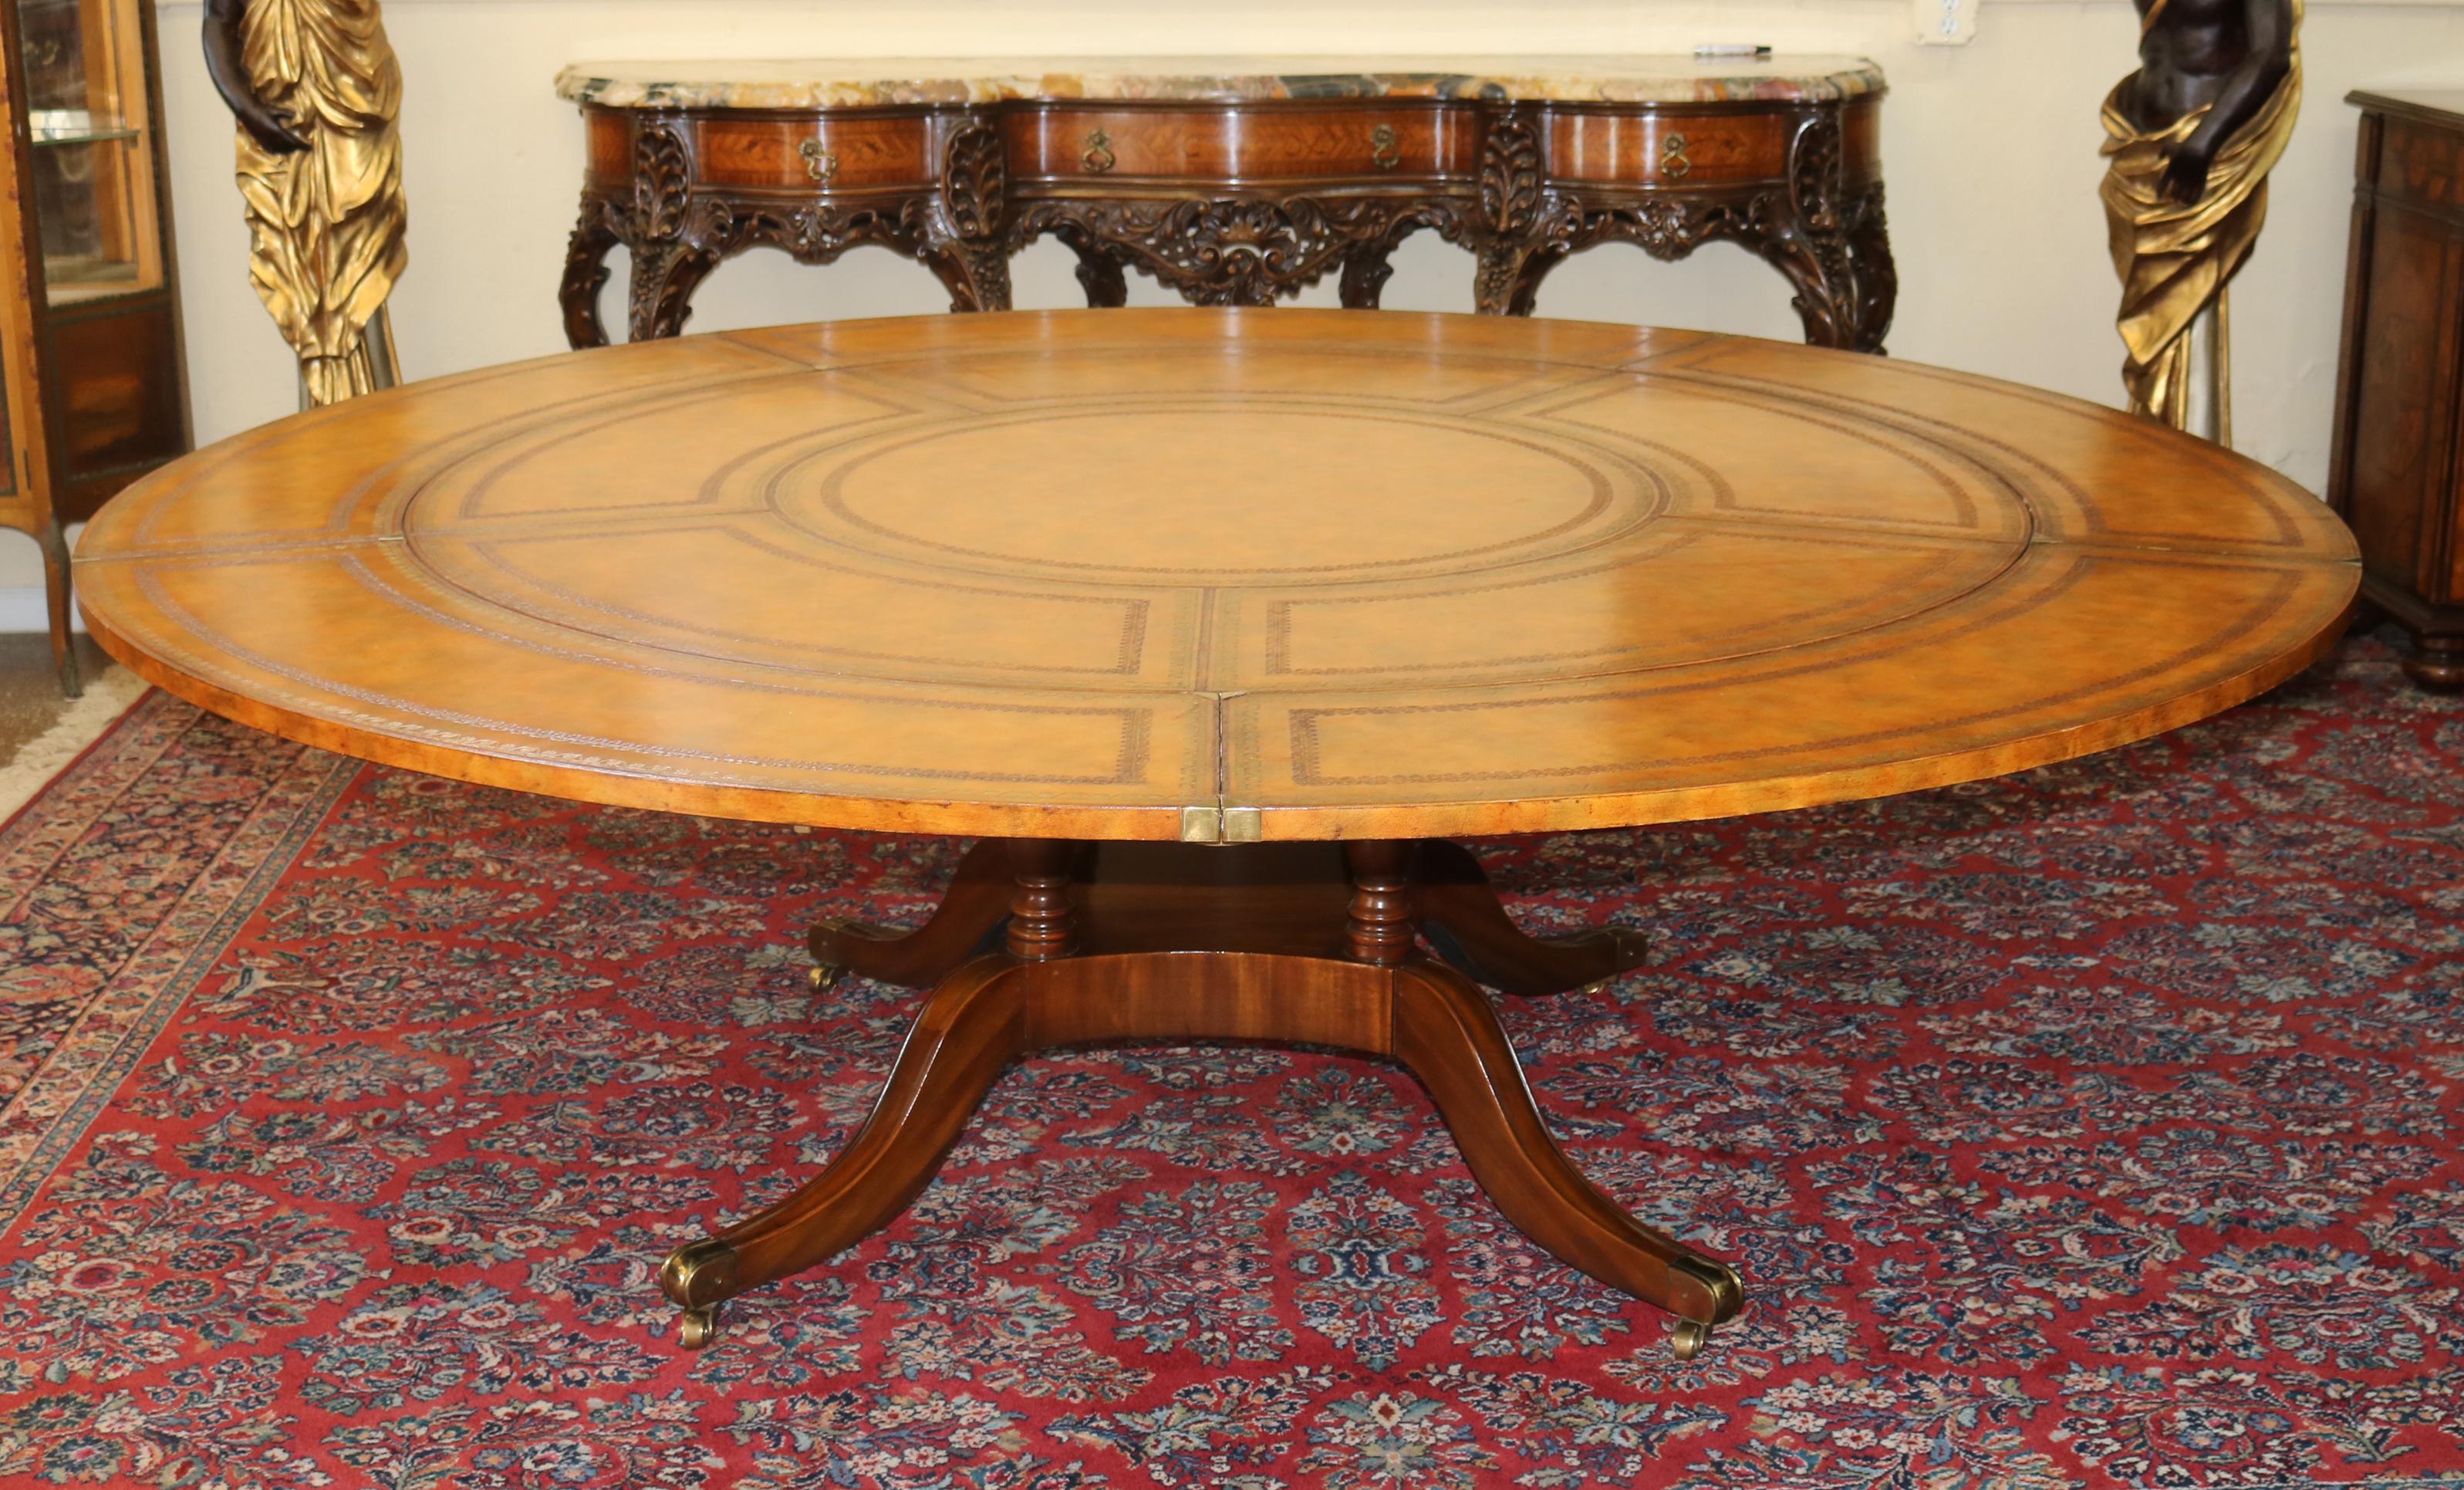 Georgian Style Maitland Smith Tooled Leather Round Perimeter Table

Dimensions : 63.25